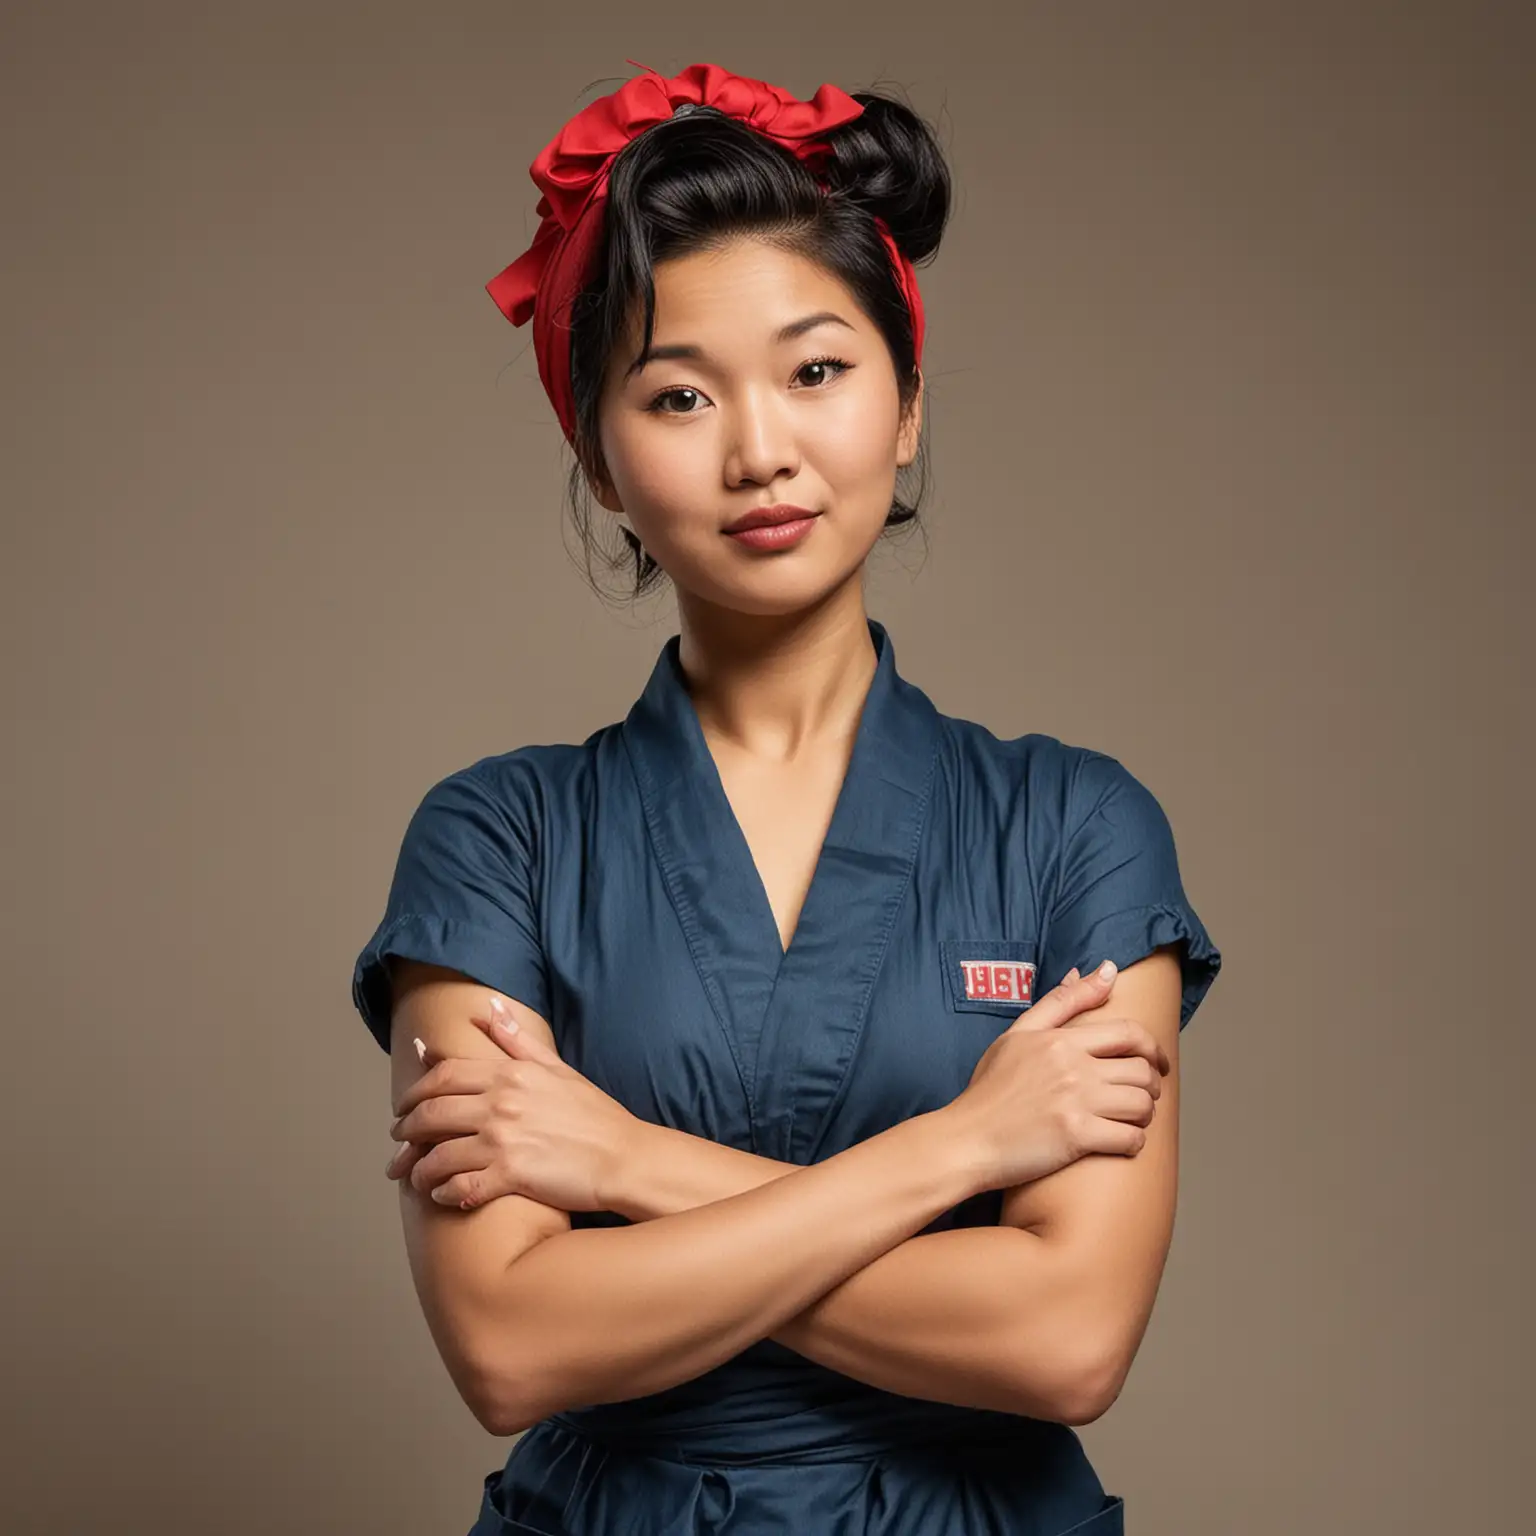 Modern Doula Asian Woman Posing as Rosie the Riveter